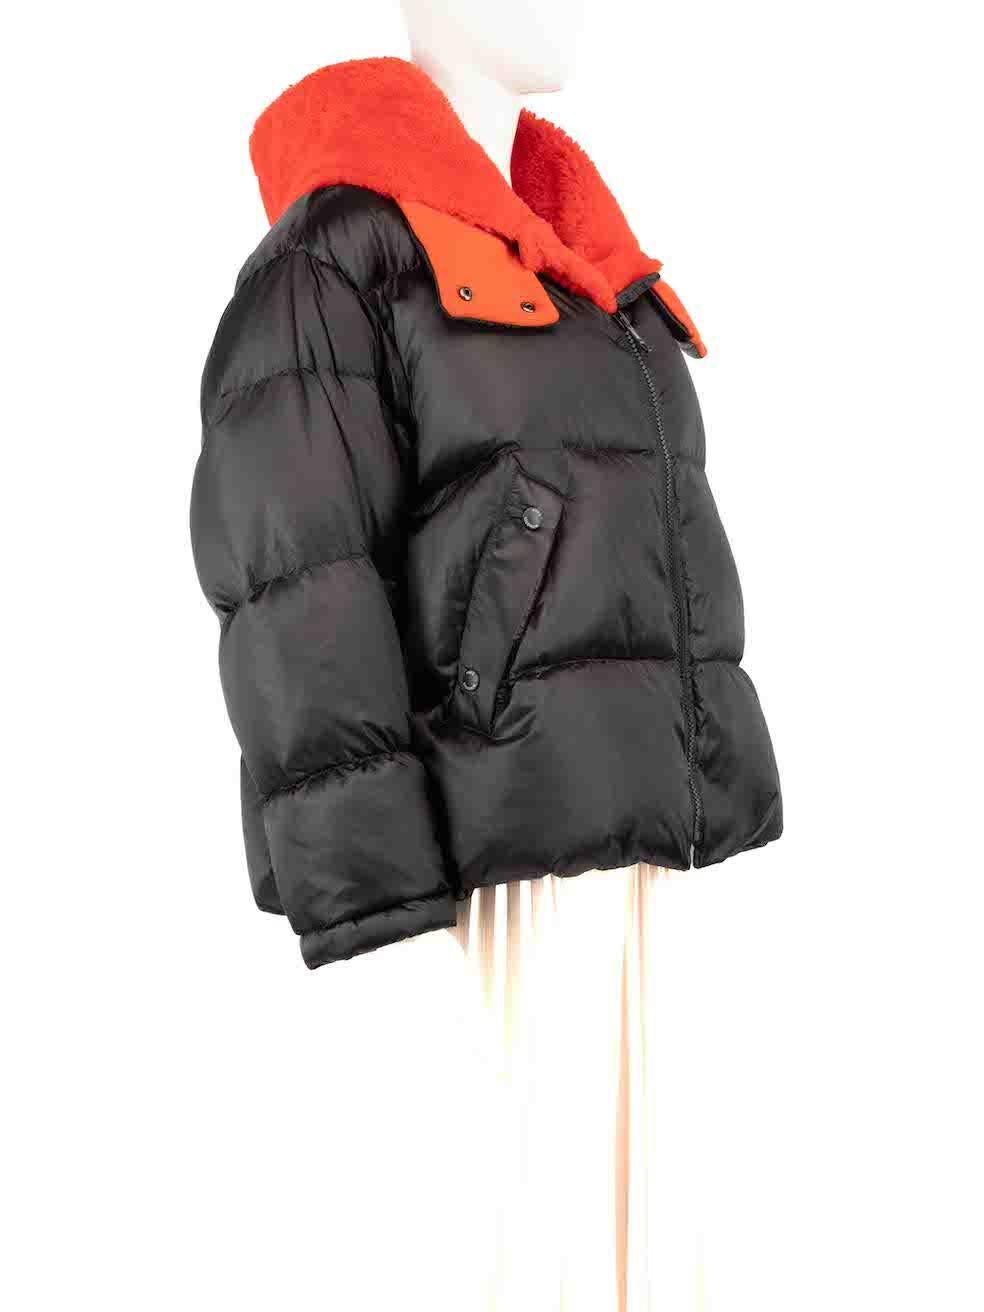 CONDITION is Very good. Minimal wear to coat is evident. Minimal wear to the right sleeve cuff with plucks to the outer on this used Yves Salomon designer resale item.
 
 
 
 Details
 
 
 Black
 
 Polyester
 
 Puffer coat
 
 Detachable red leather